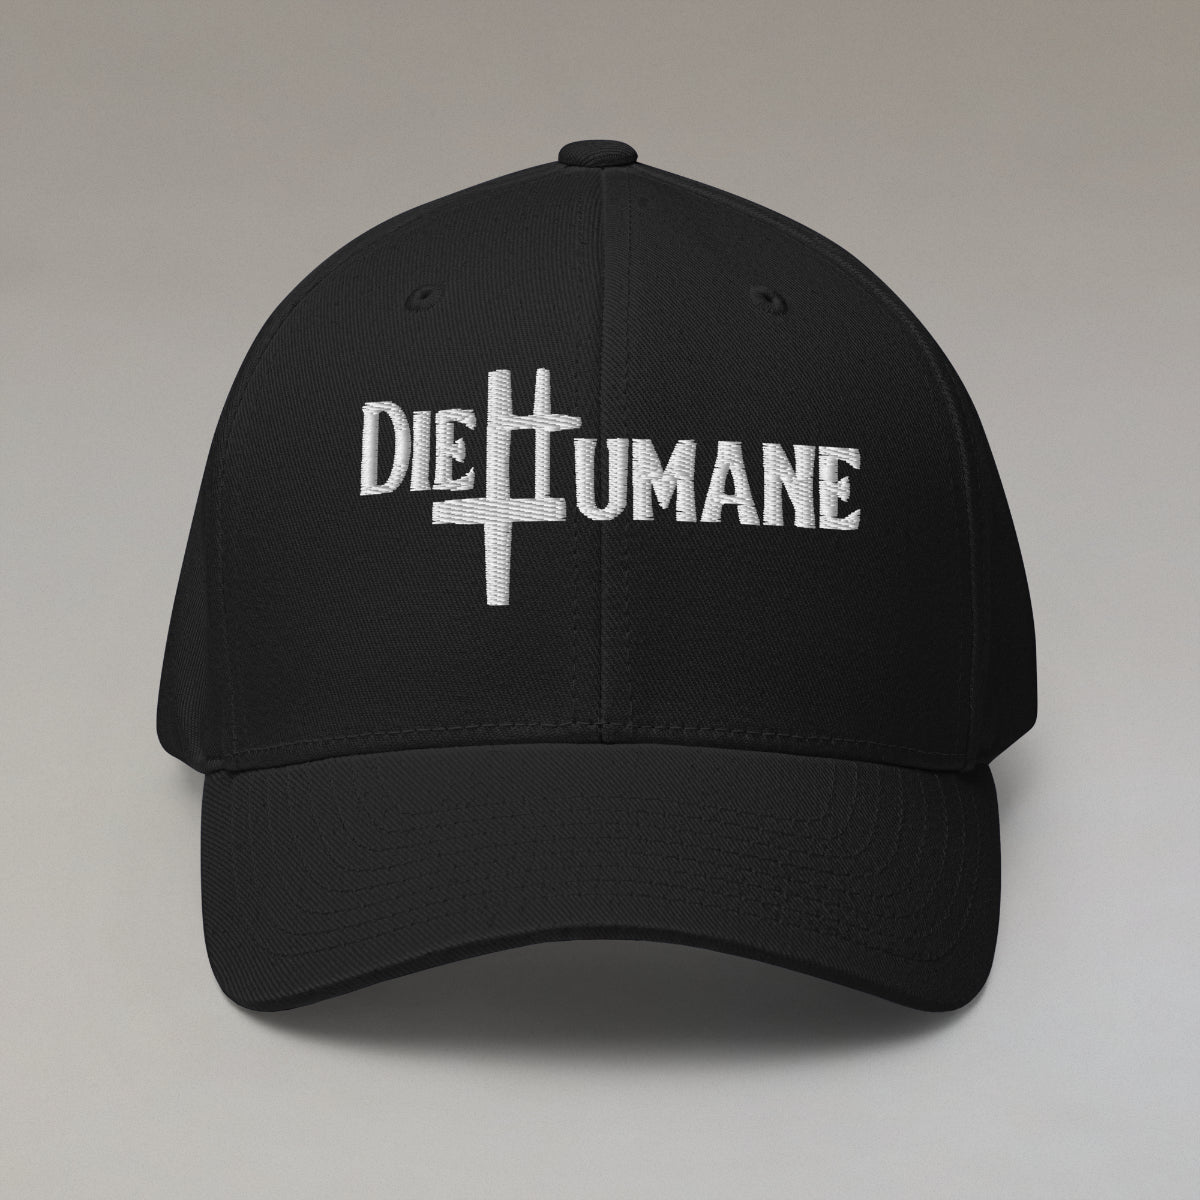 DieHumane hat. Black baseball cap with white stitching, embroidery